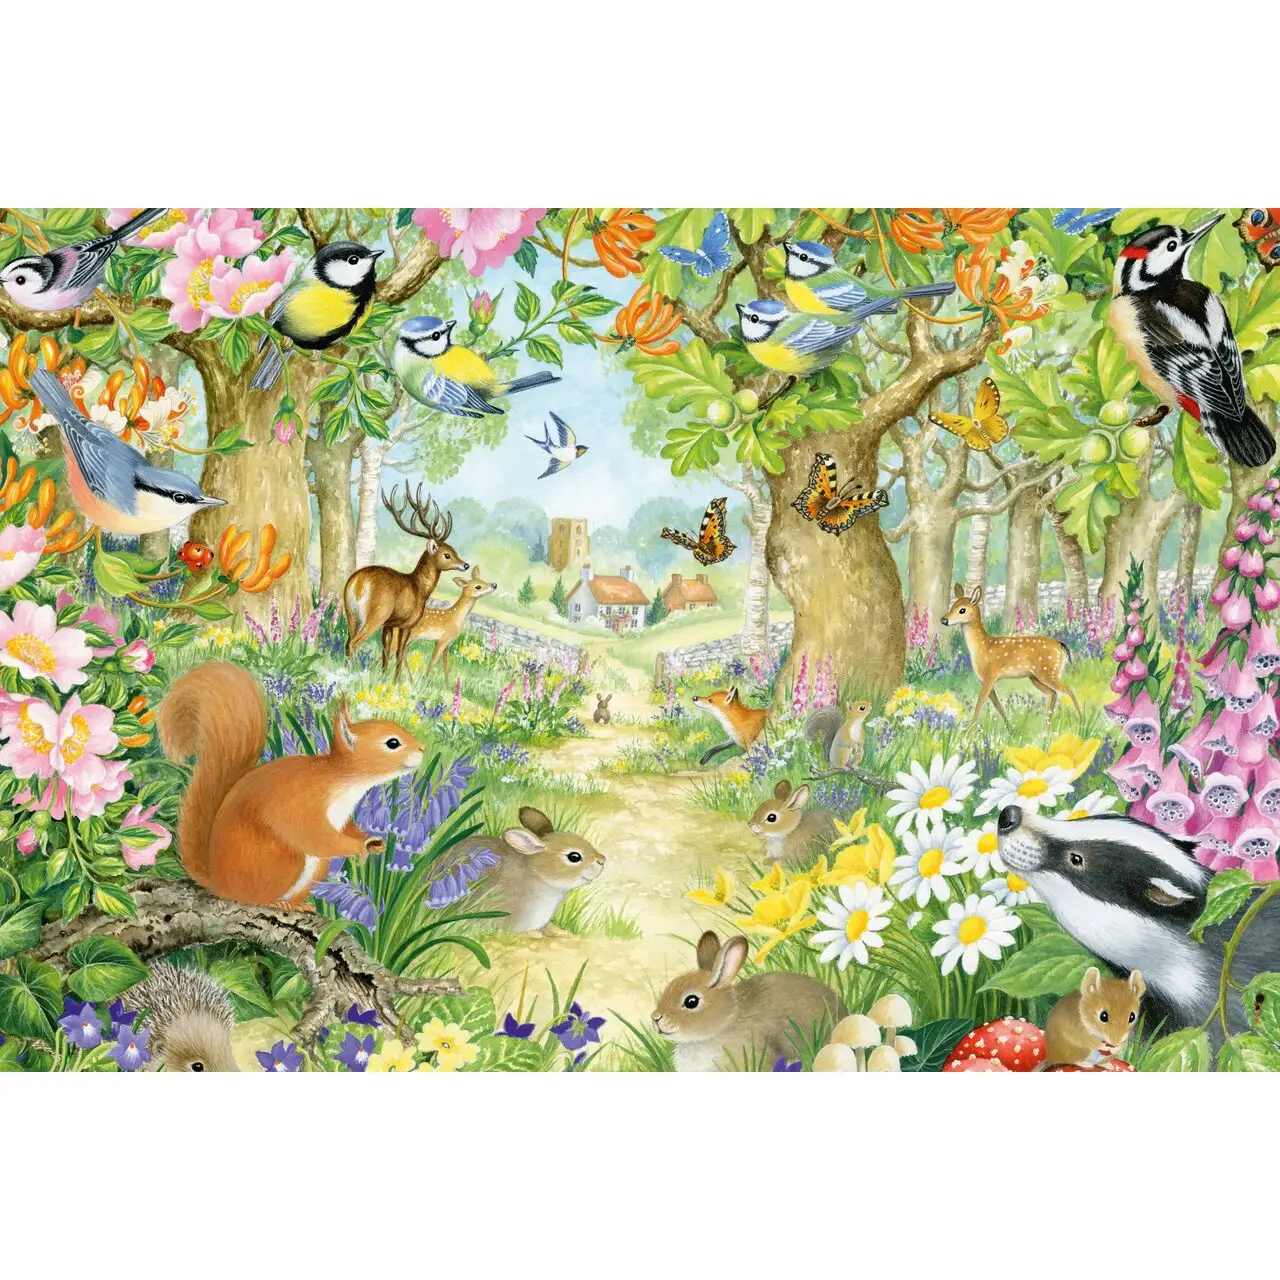 Puzzle Tiere im Wald 100 Teile